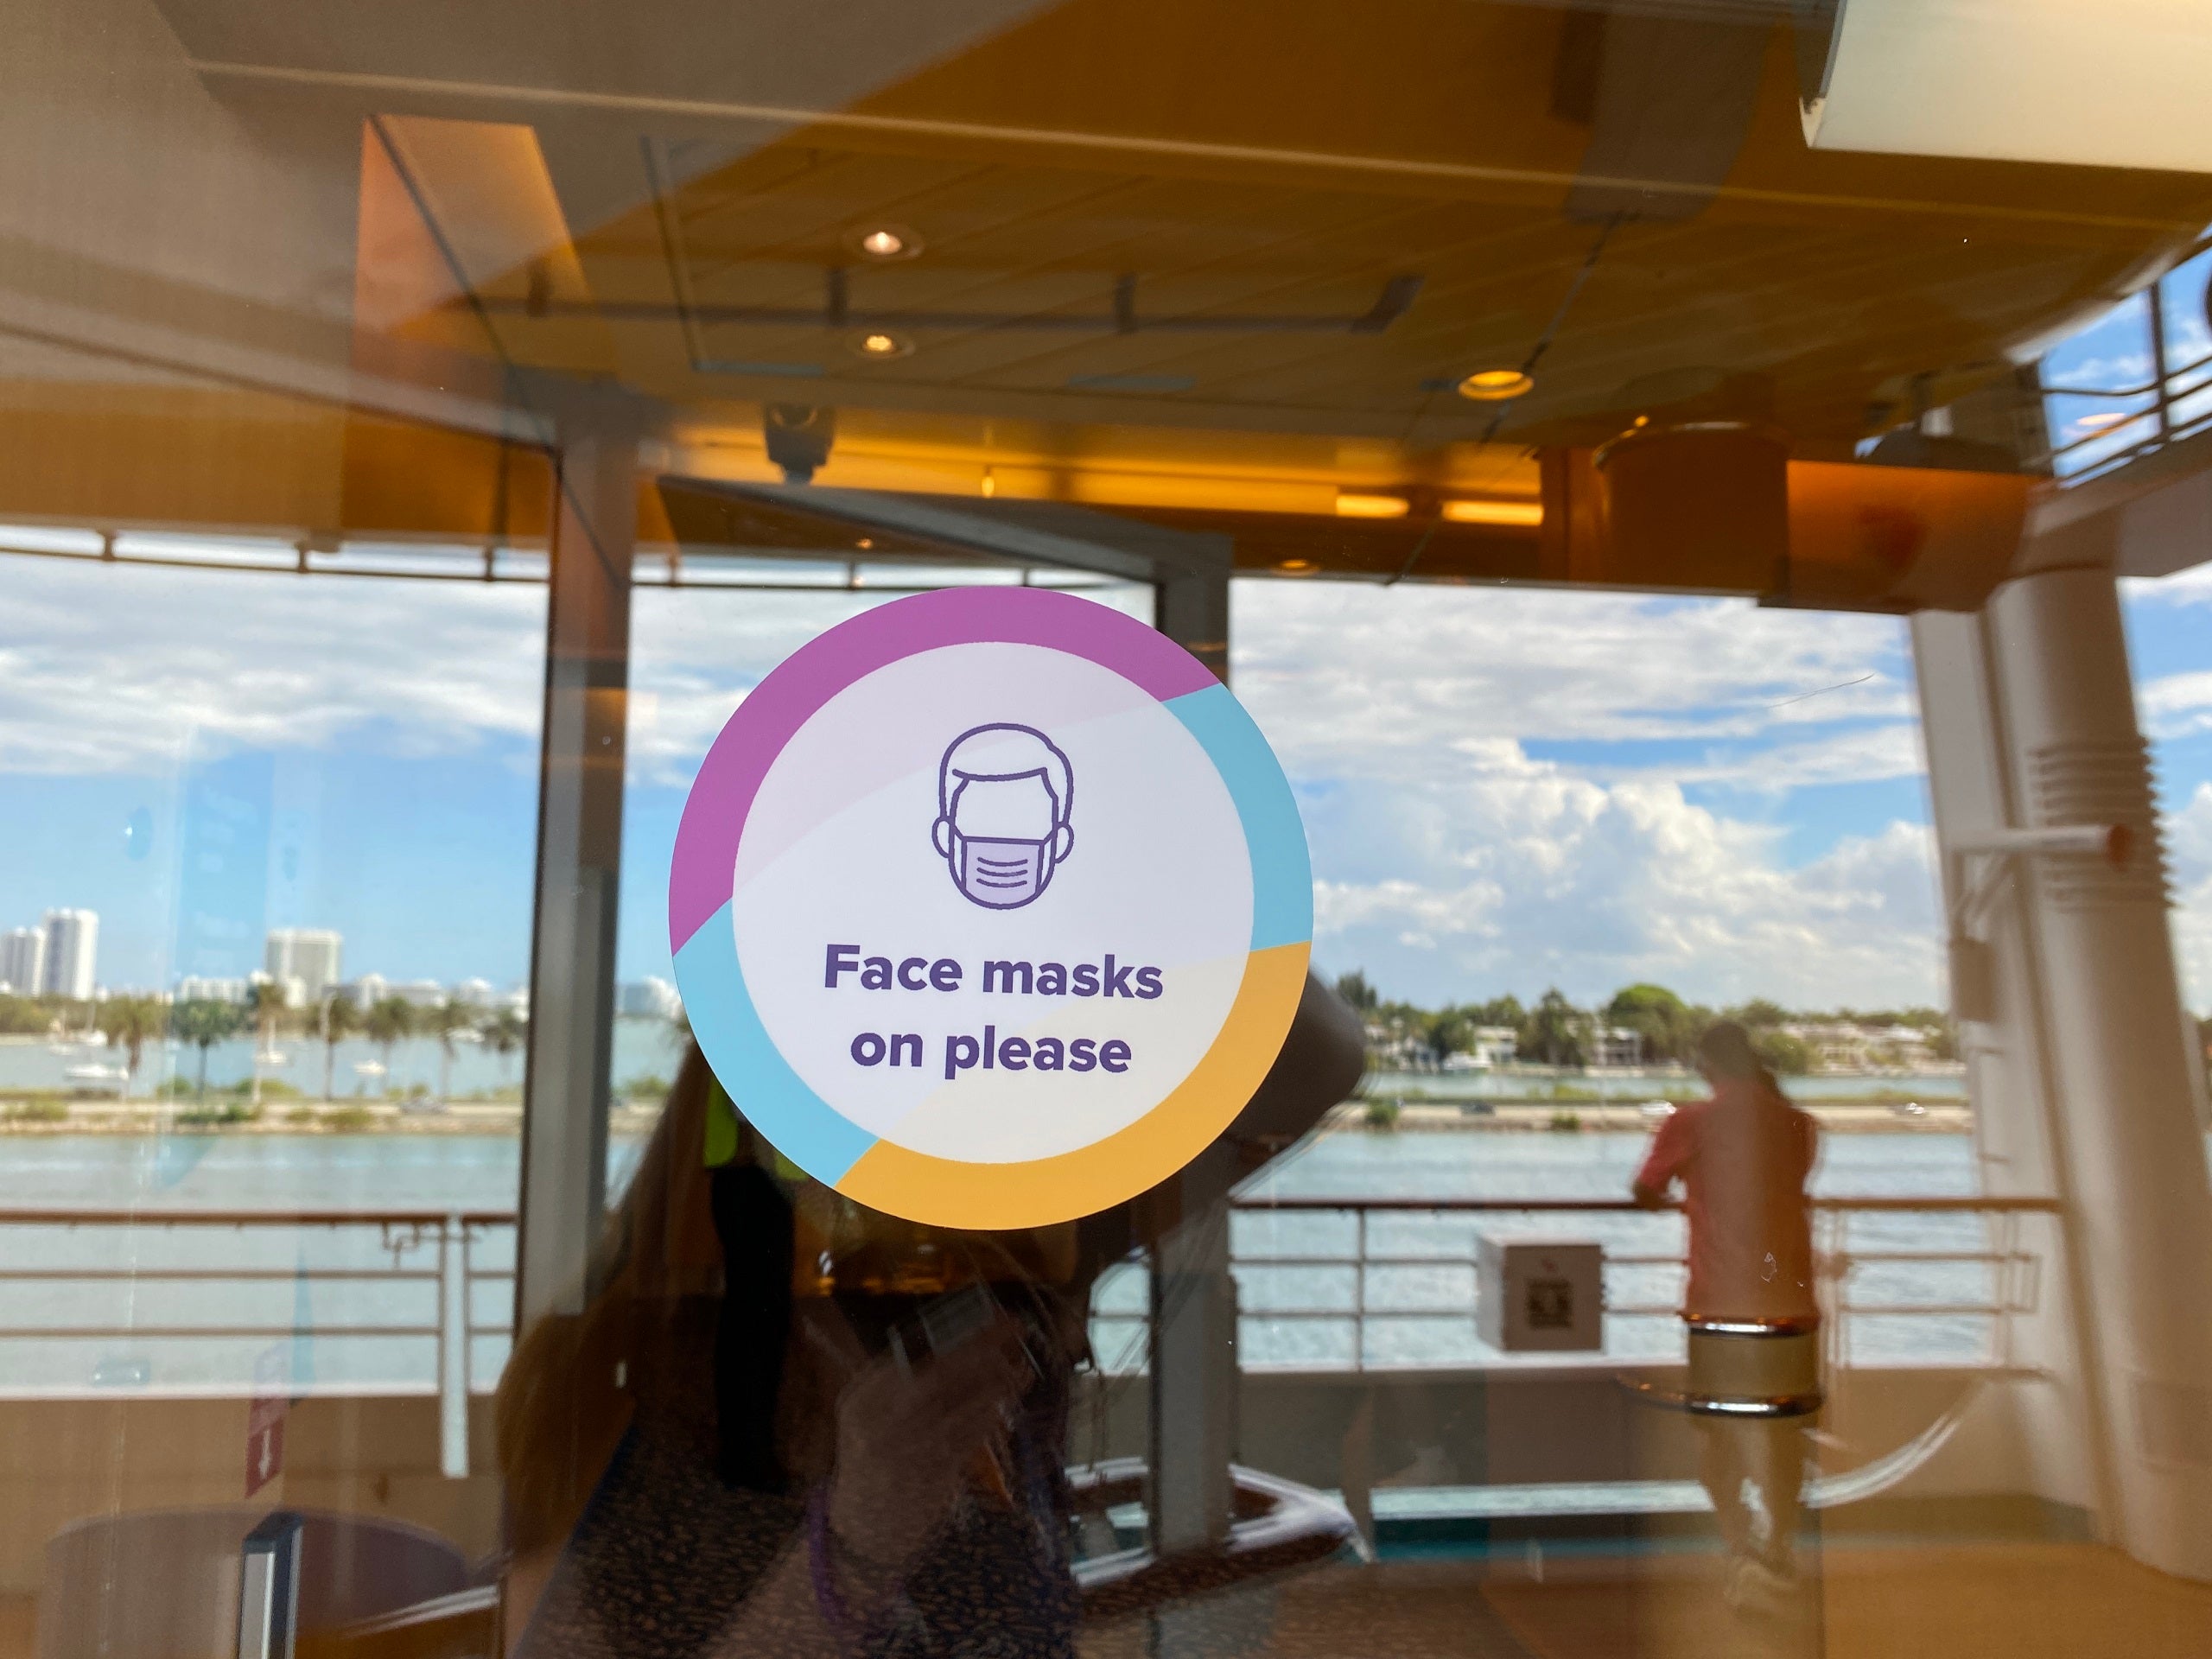 Signage for mask requirements on Freedom of the Seas